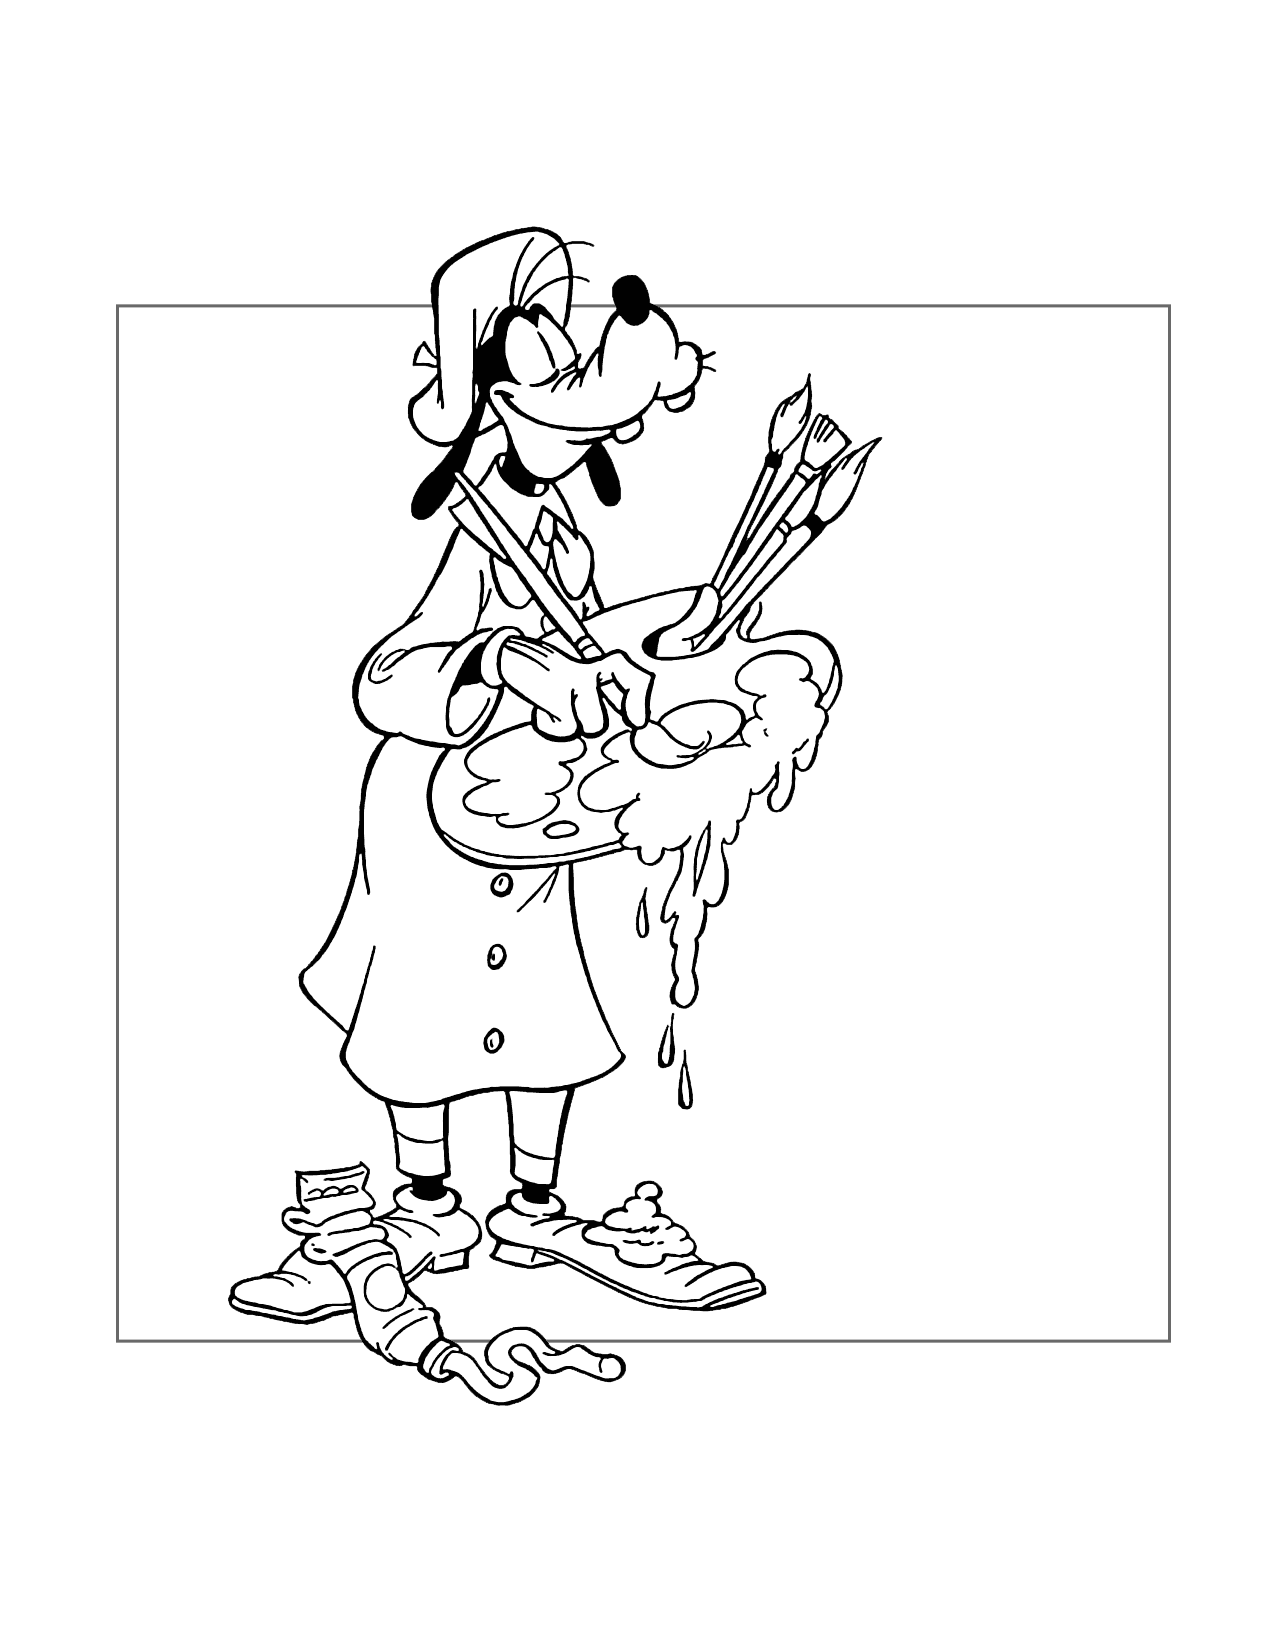 Goofy Is Painting A Picture Coloring Page